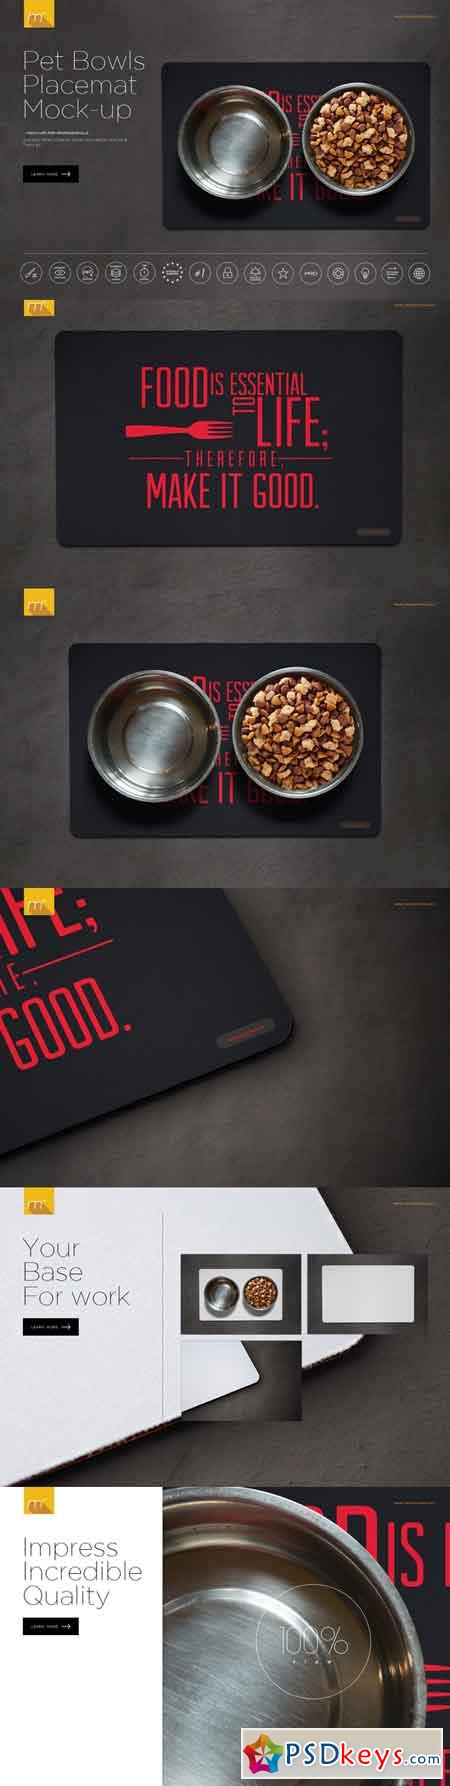 Download Placemat Free Download Photoshop Vector Stock Image Via Torrent Zippyshare From Psdkeys Com